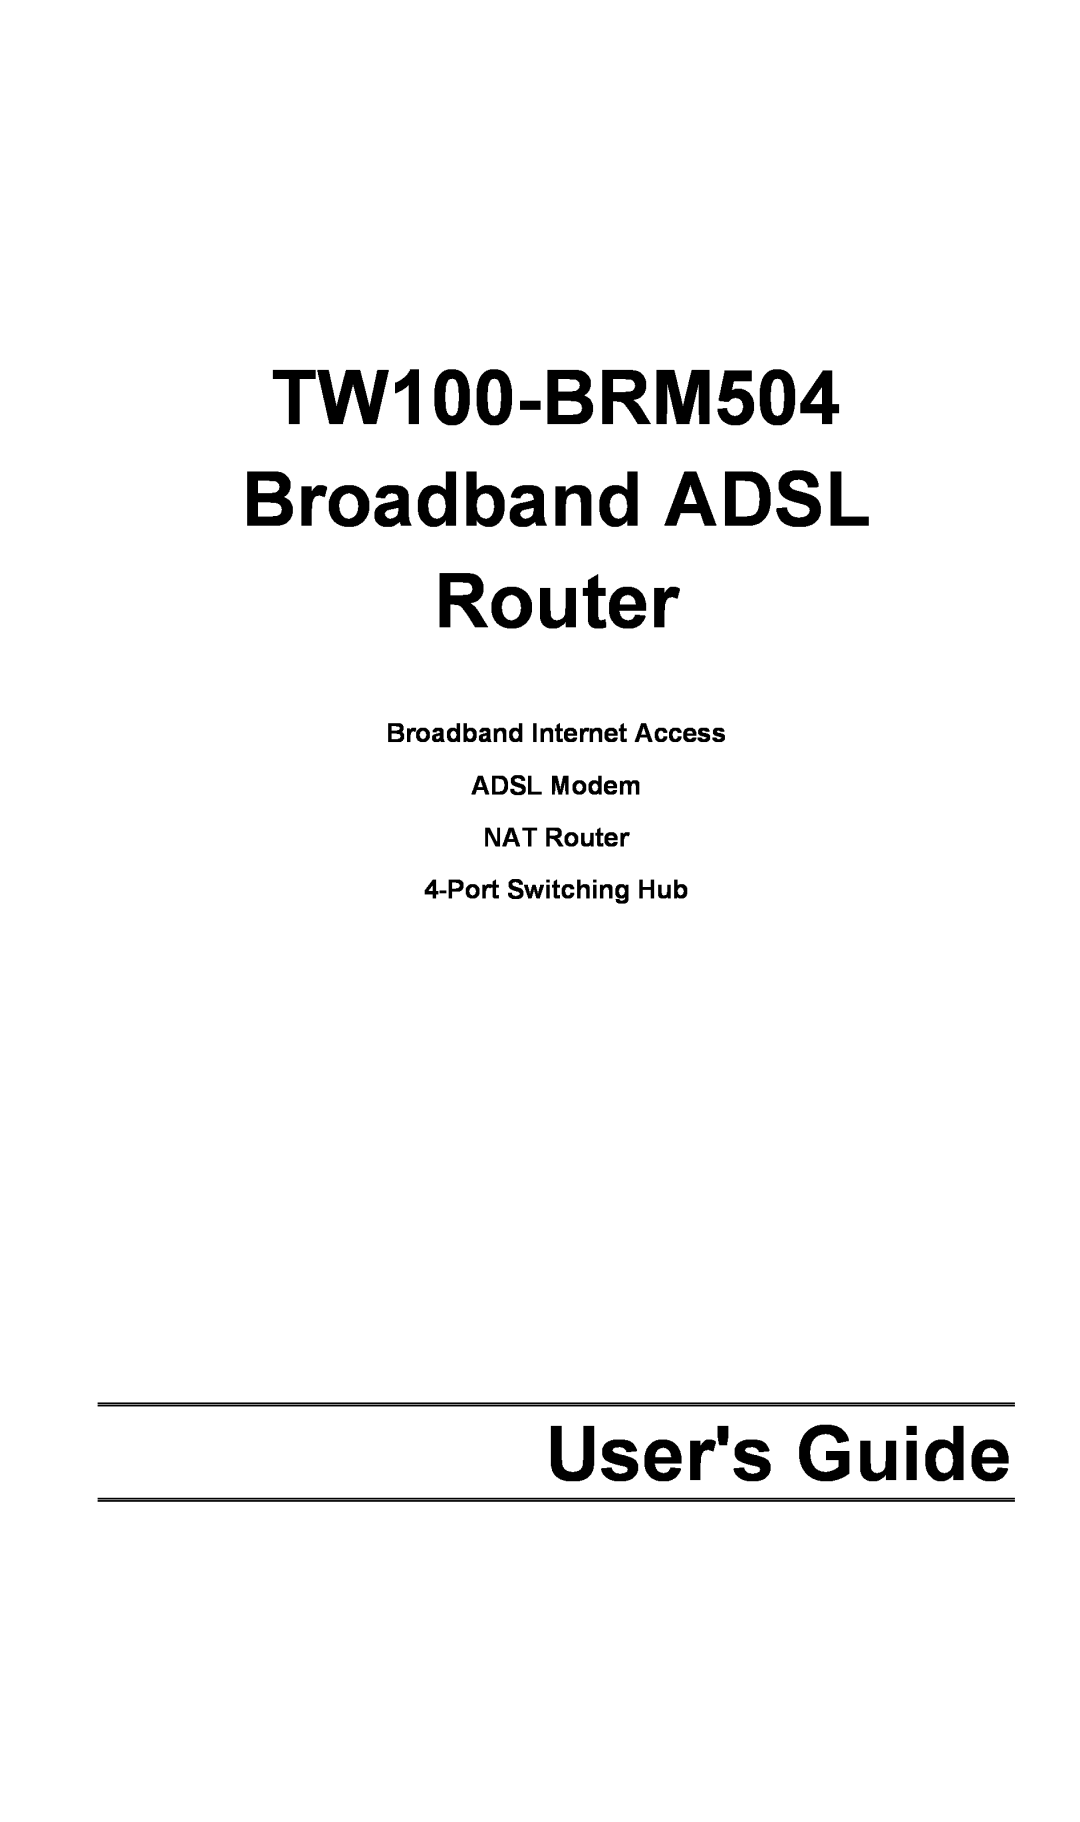 TRENDnet manual TW100-BRM504 Broadband ADSL Router, Users Guide, Broadband Internet Access ADSL Modem NAT Router 